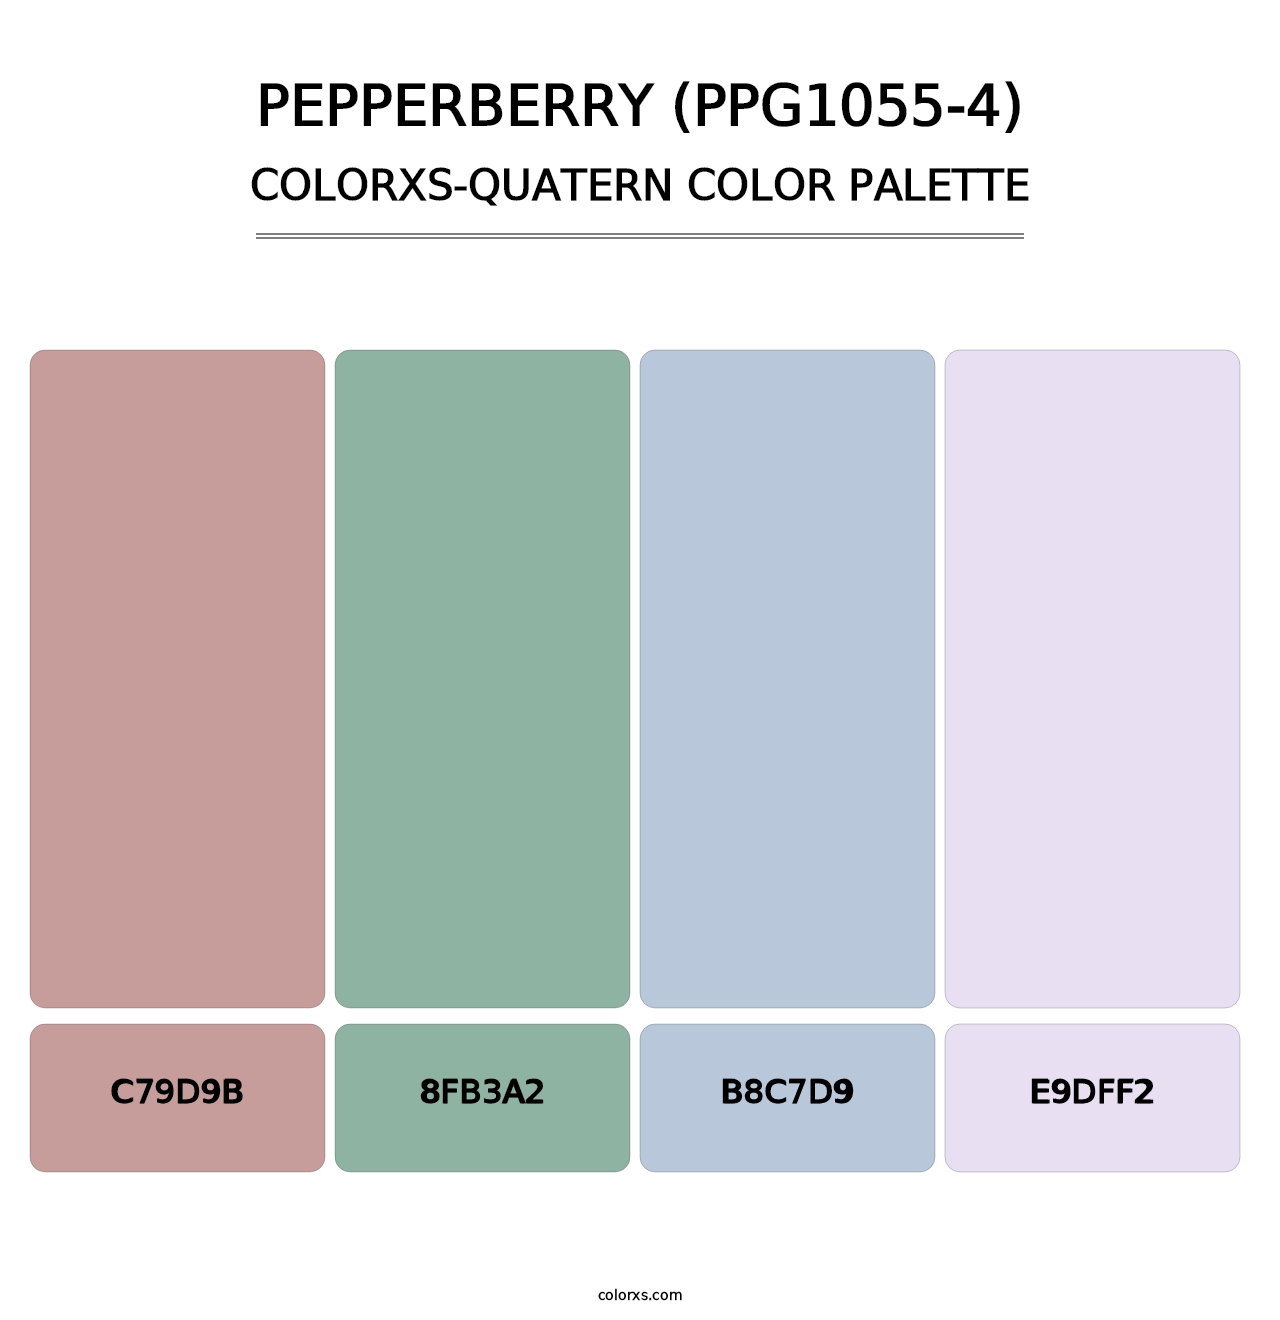 Pepperberry (PPG1055-4) - Colorxs Quatern Palette